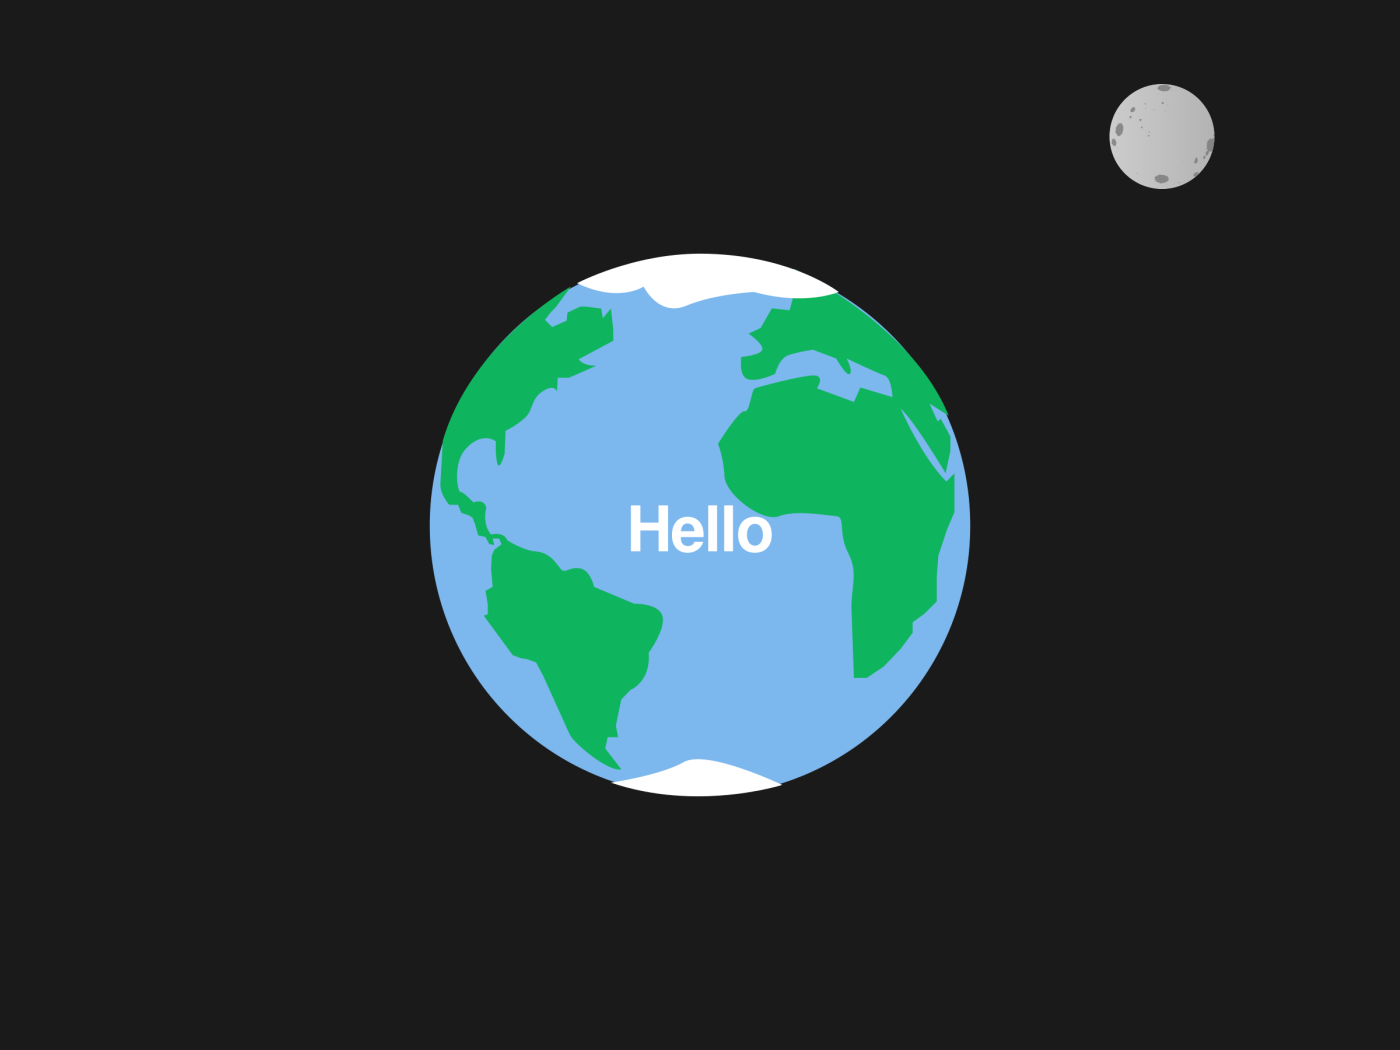 https://openclipart.org/detail/190952/hello-world